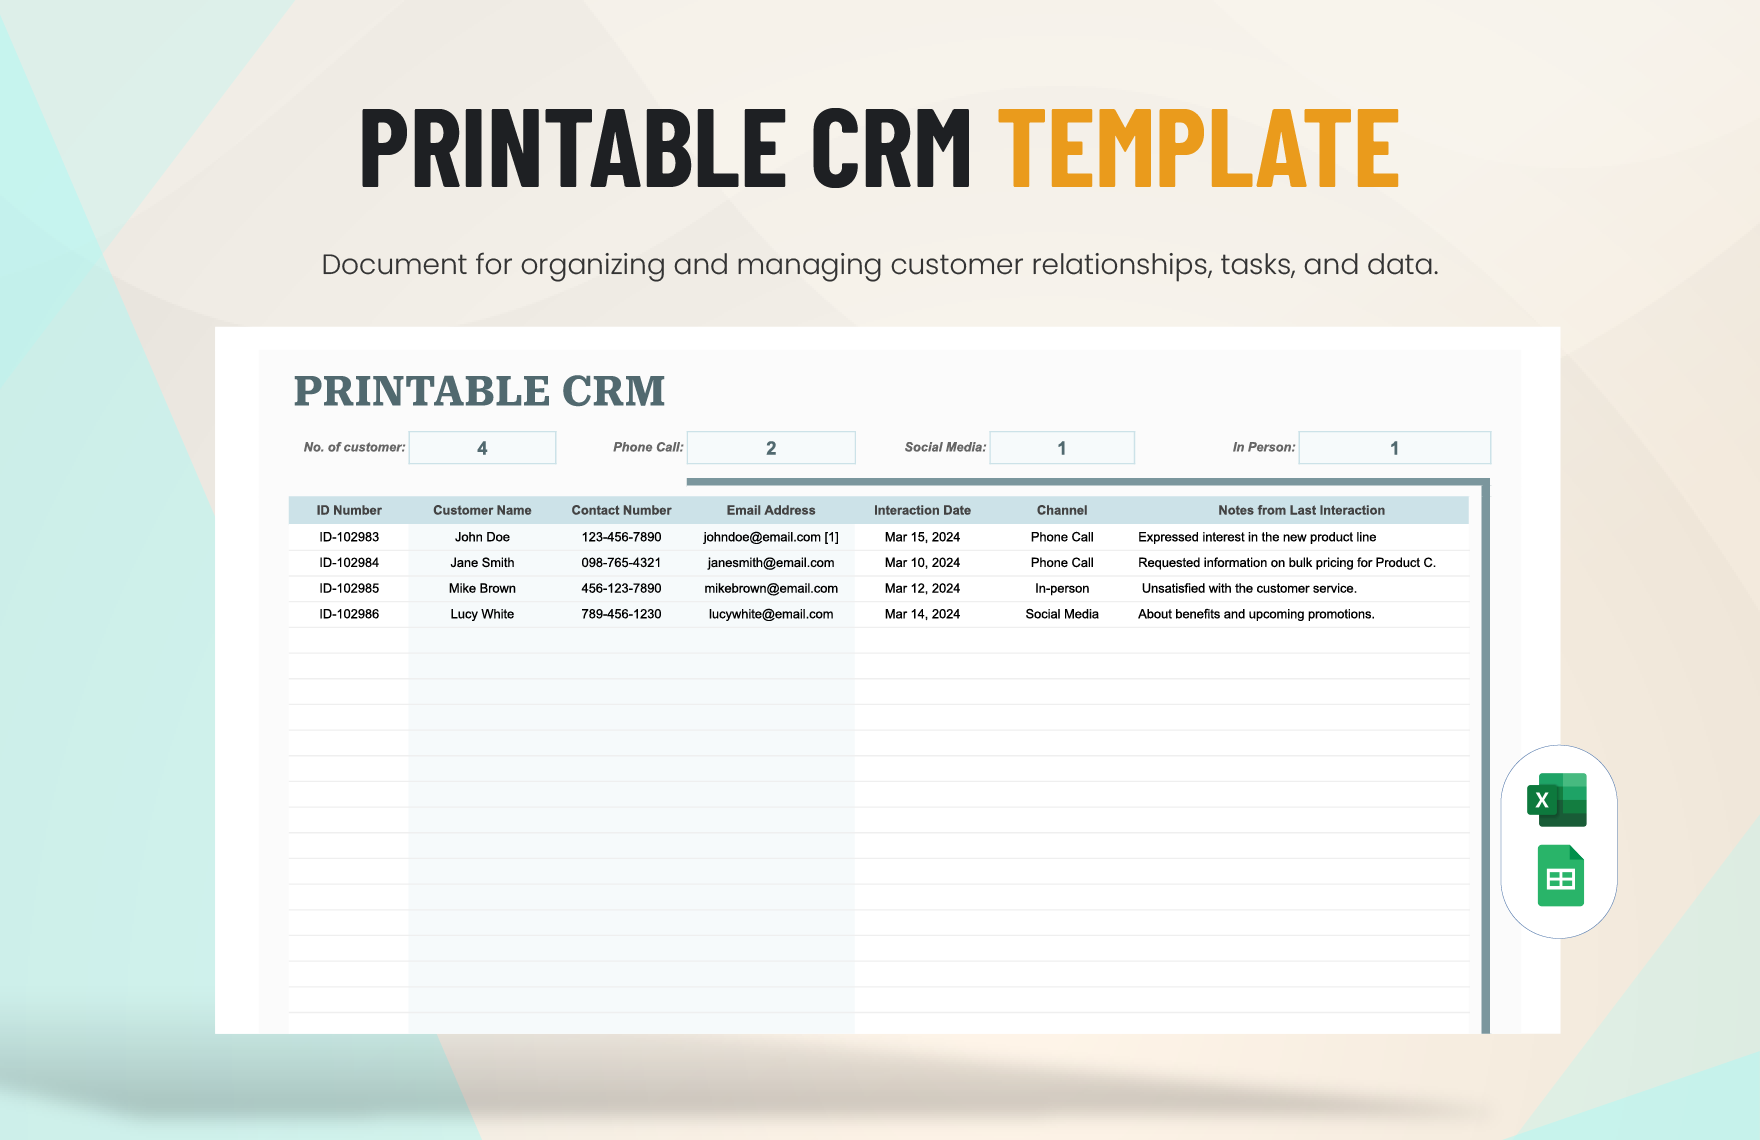 Printable CRM Template in Excel, Google Sheets